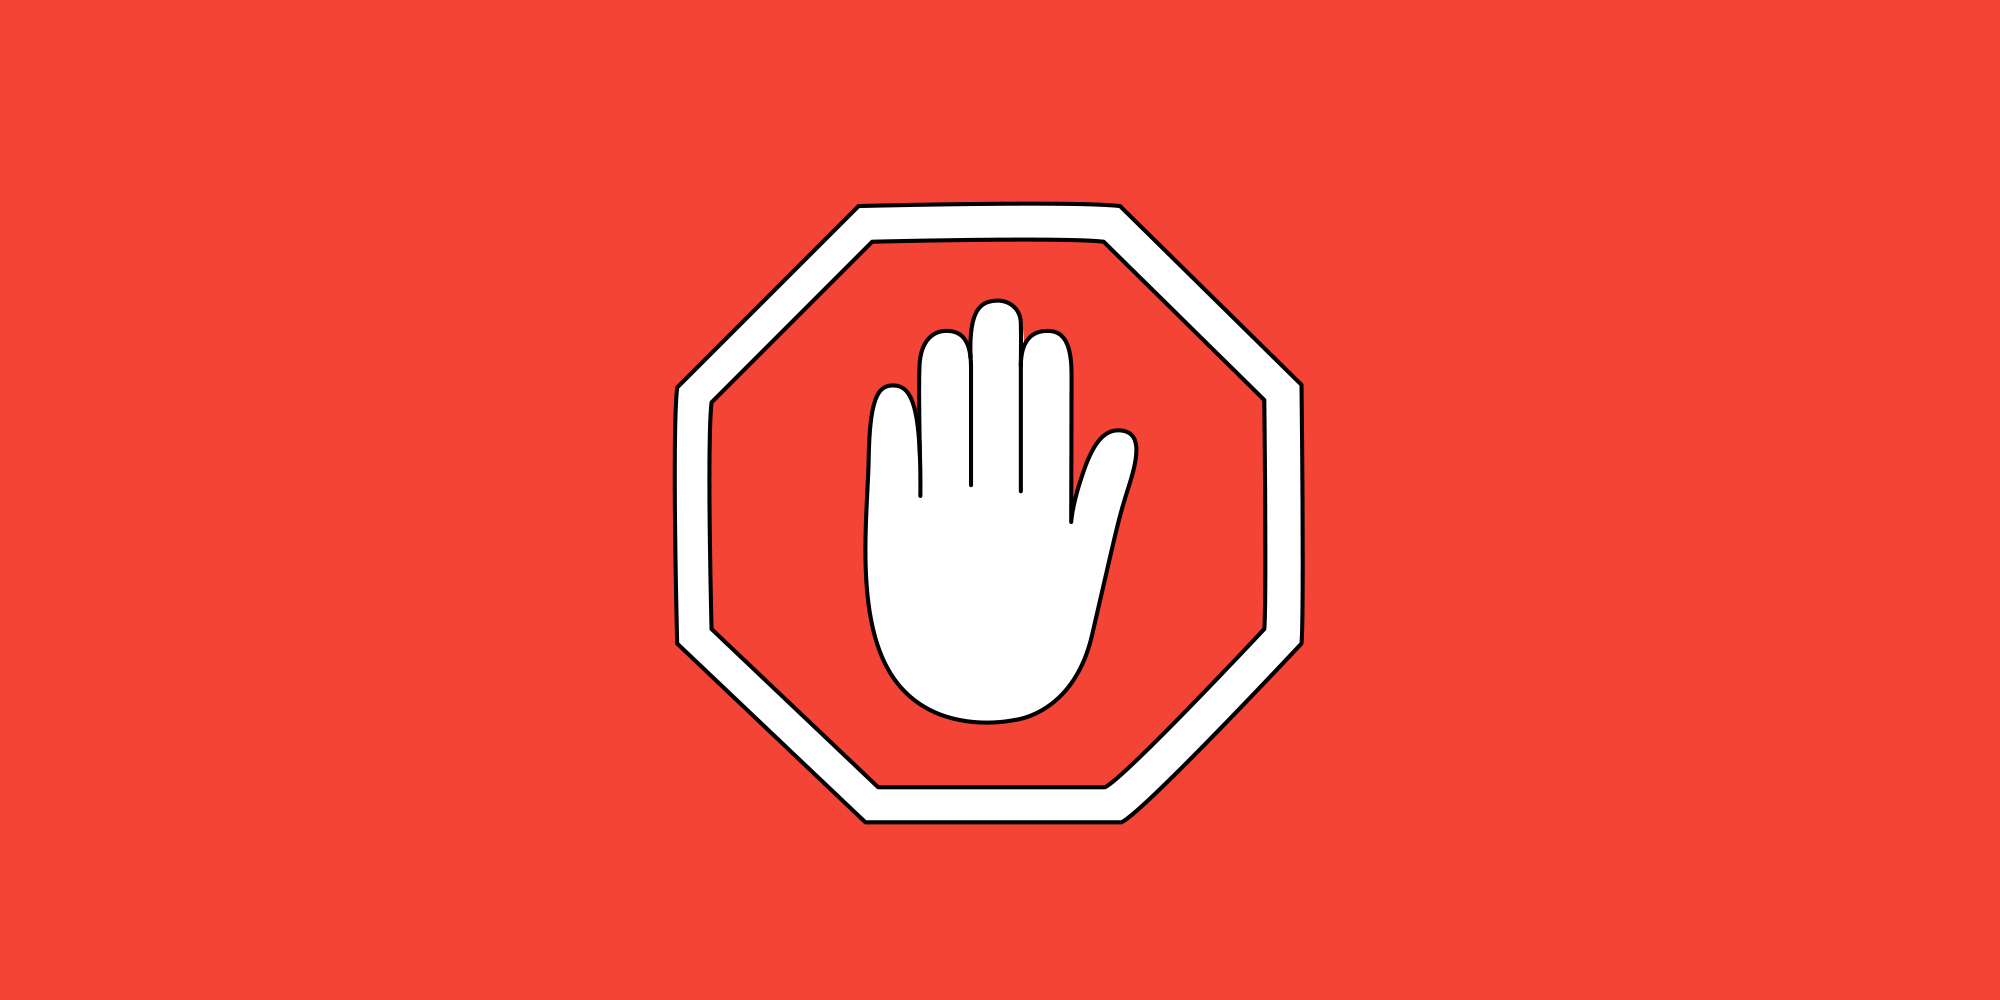 Ad-blocking... The dilemma challenging both publishers and users